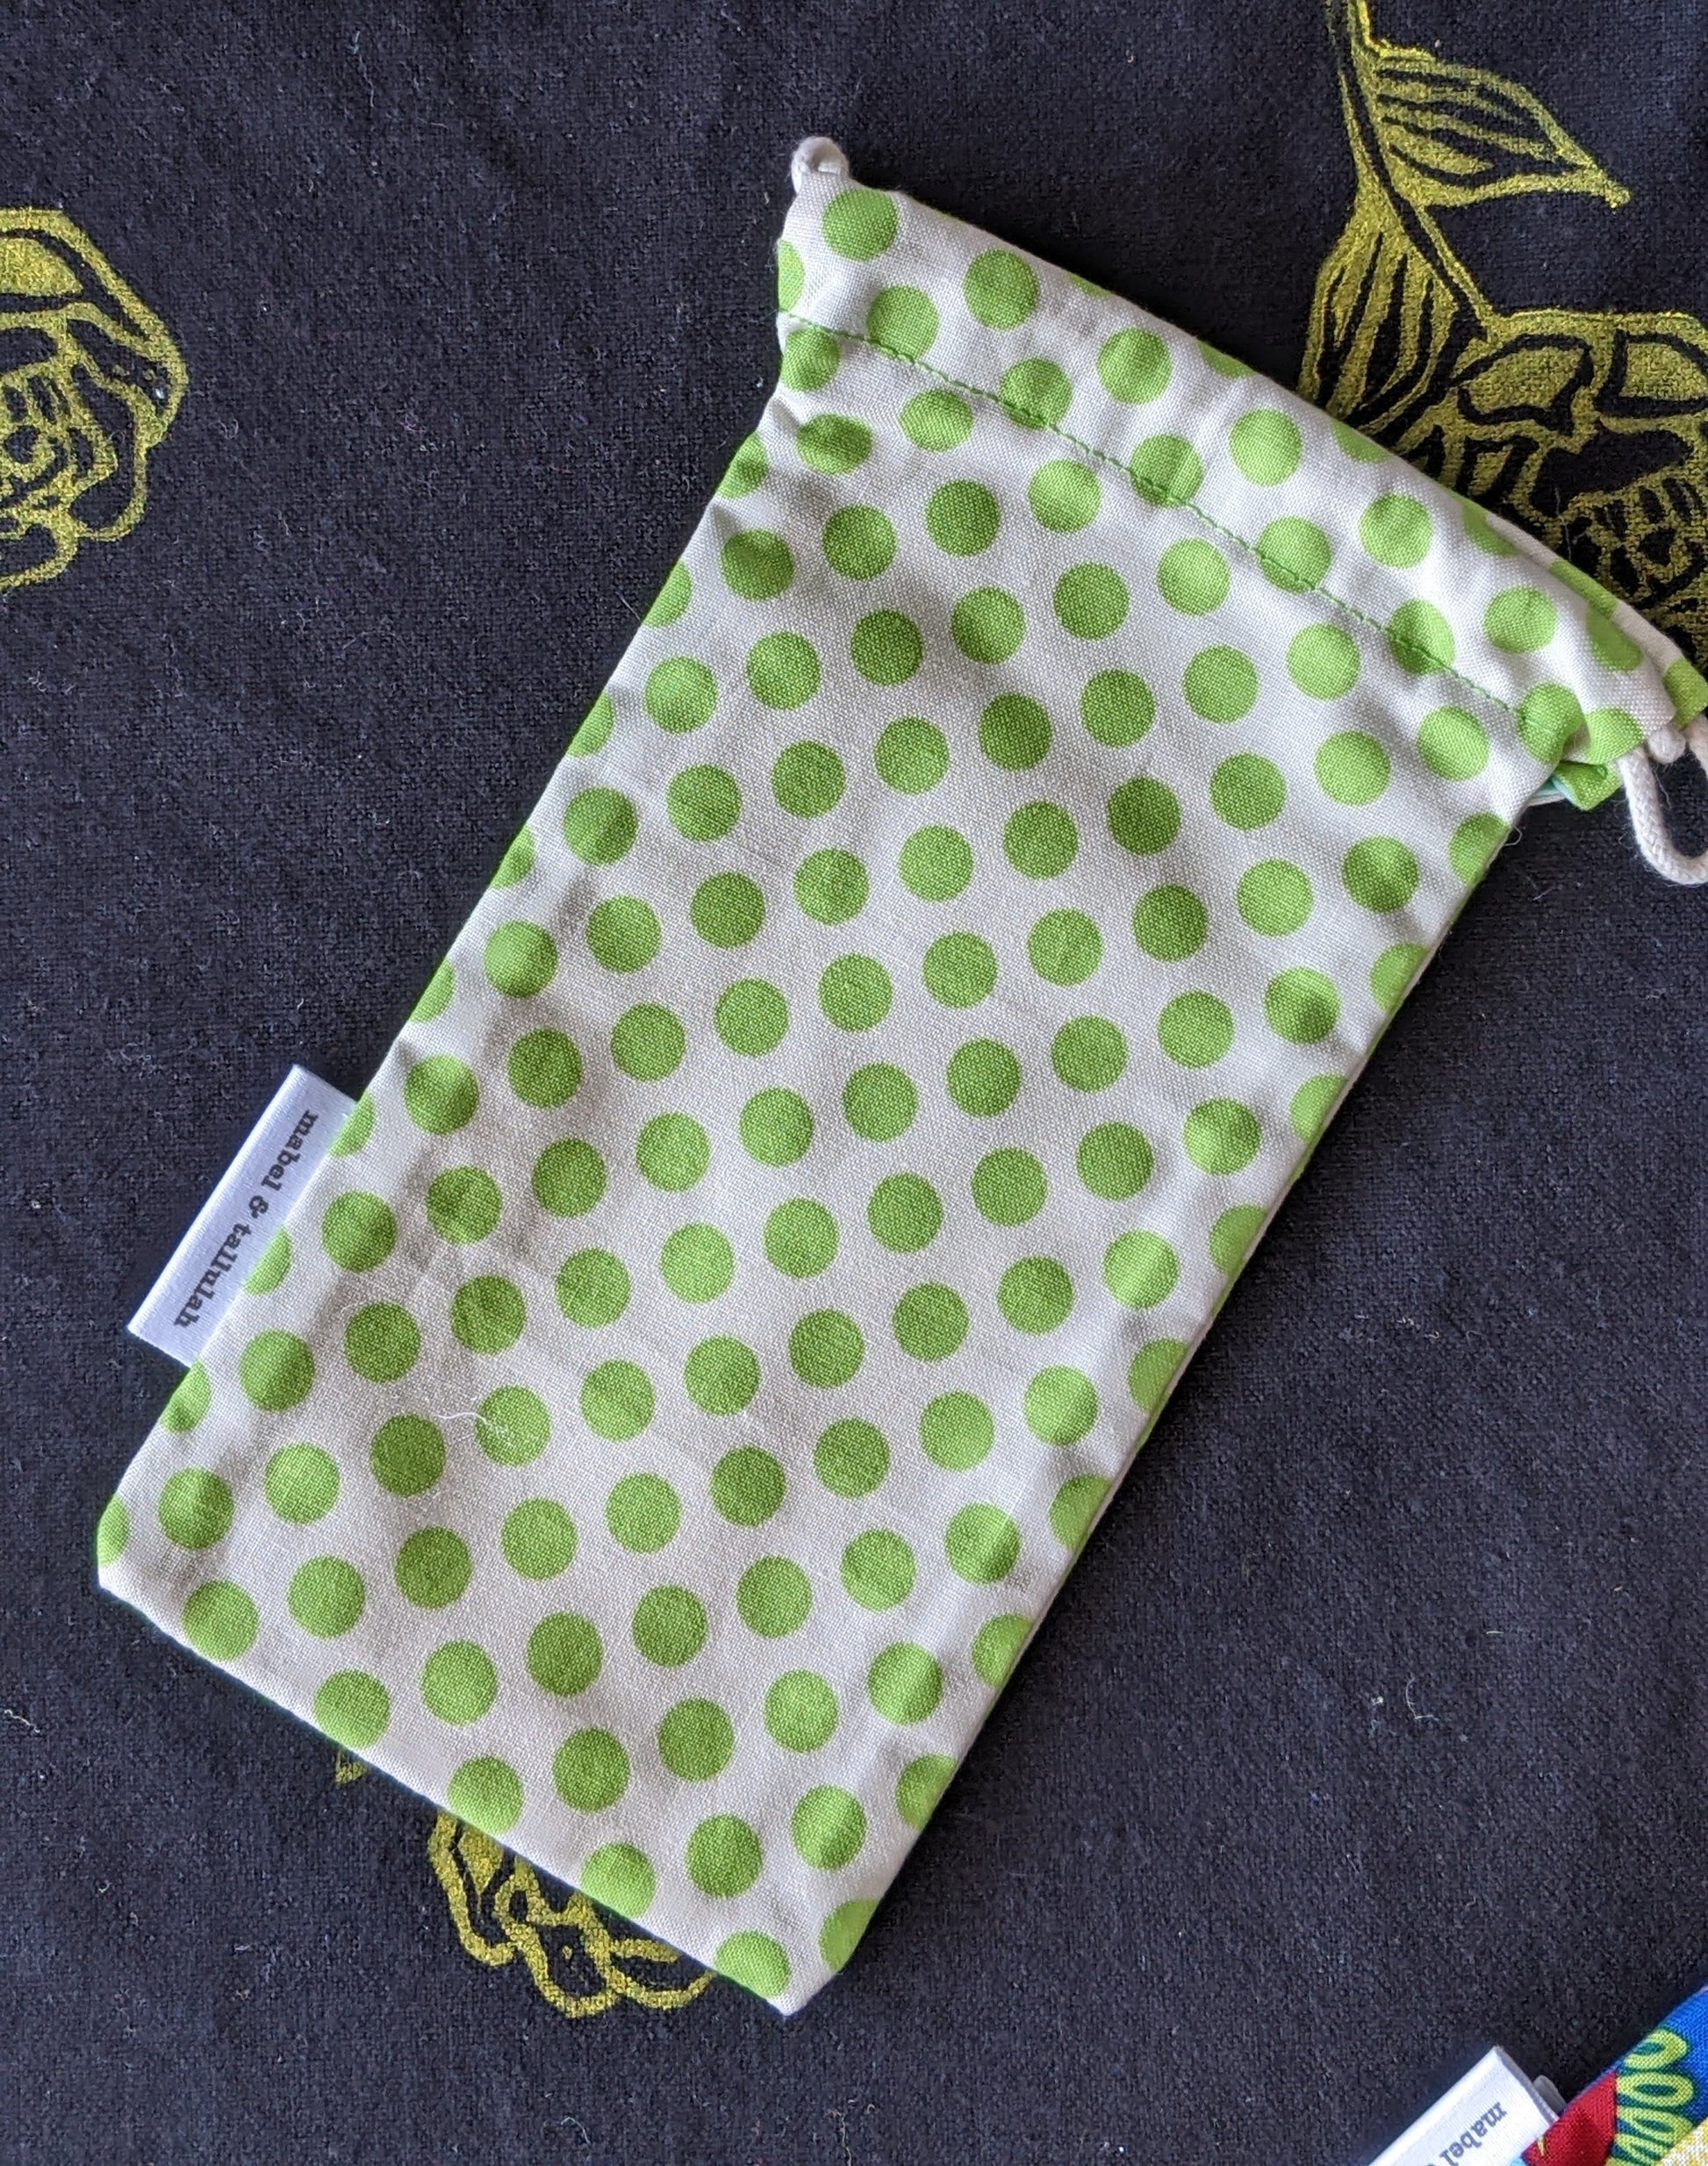 Green polka dots sunglasses cover mini pouch by The Arthly Box